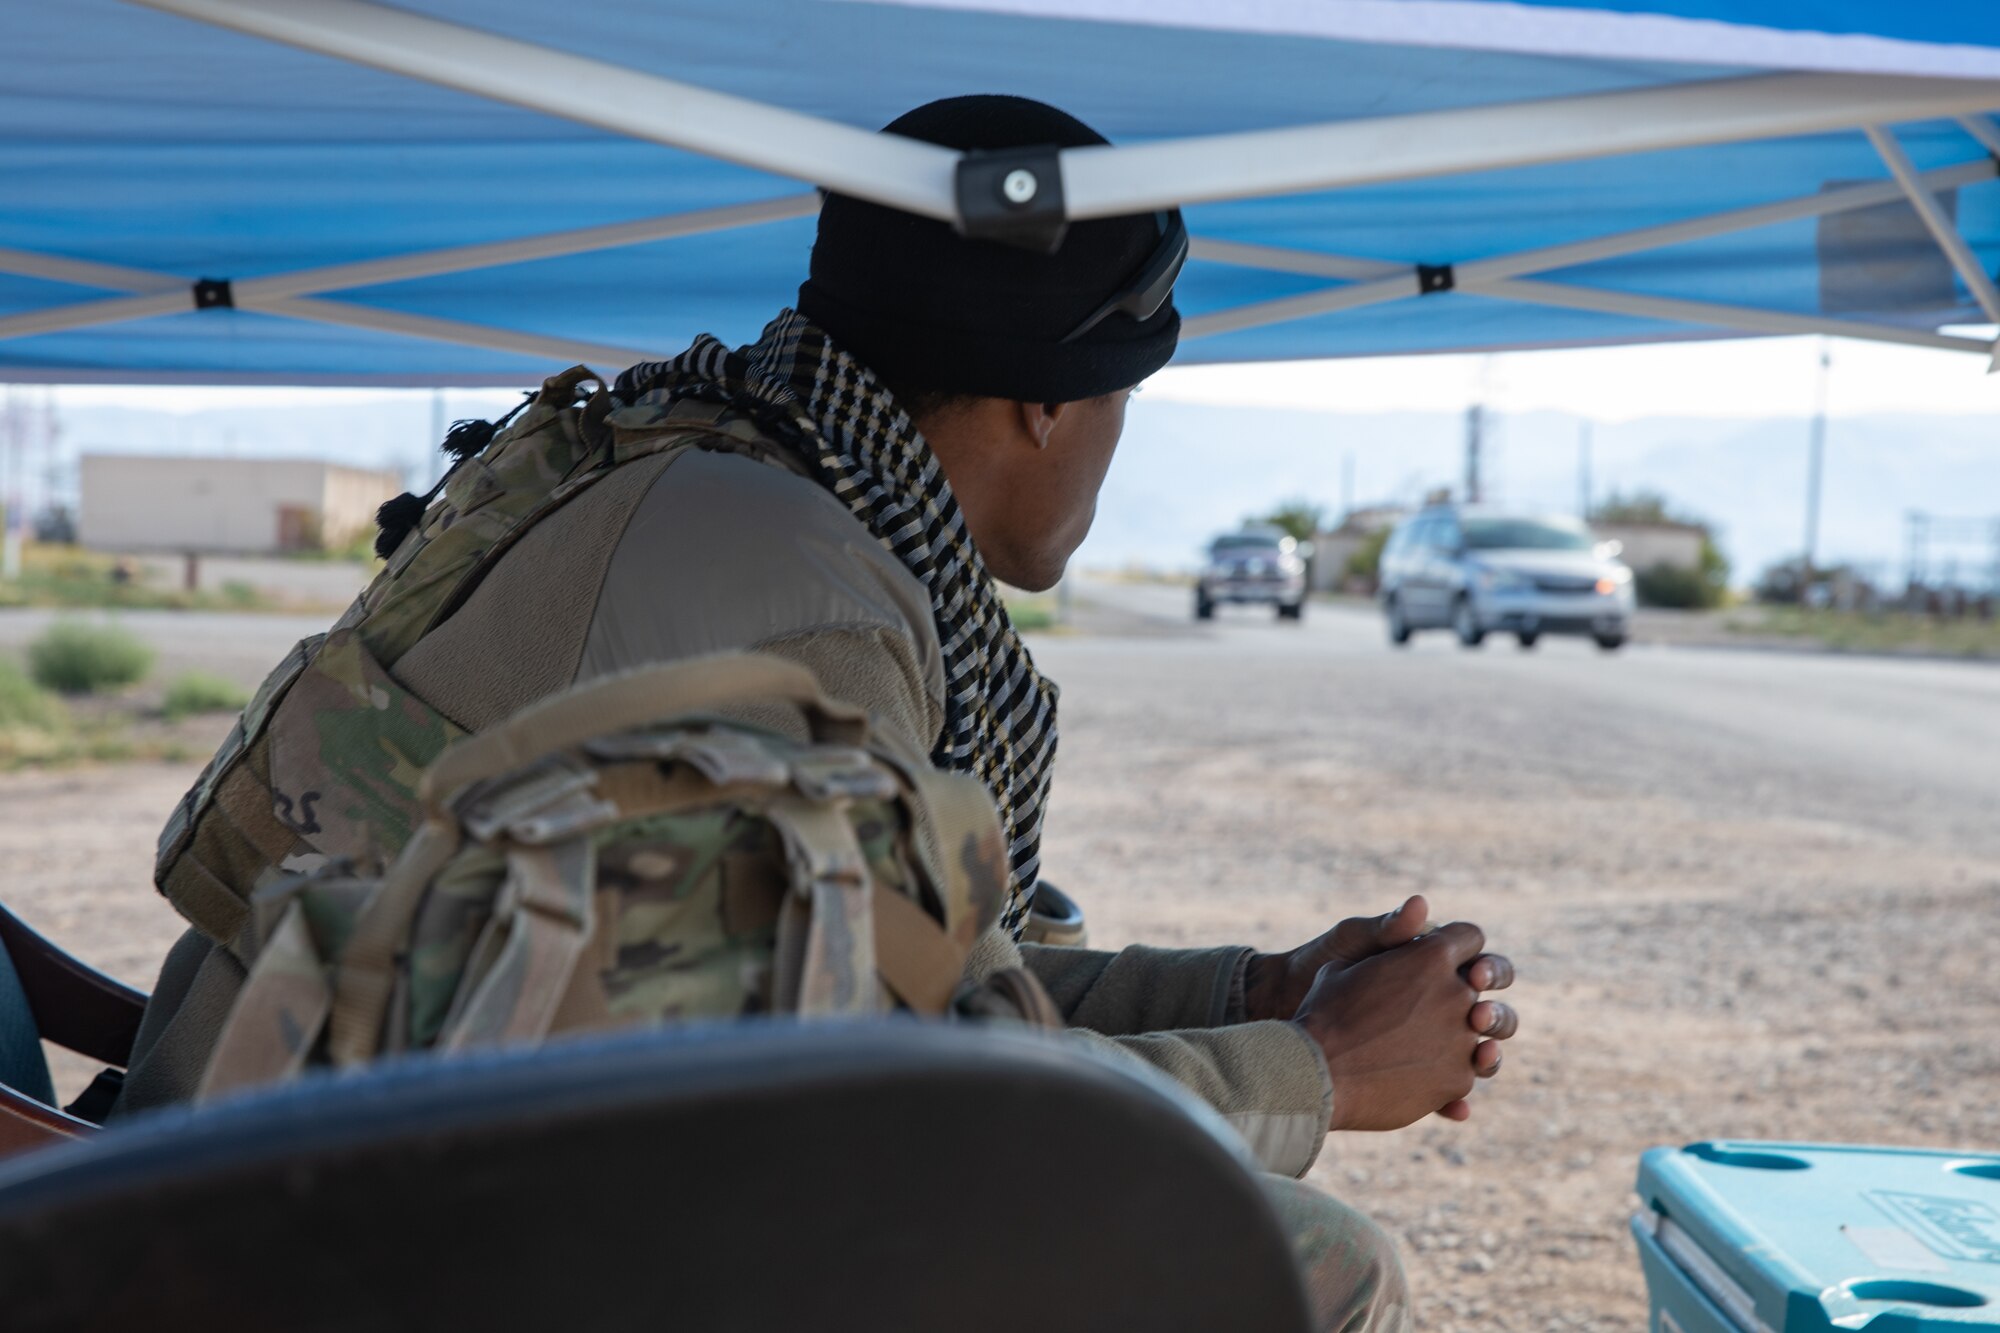 An Airman deployed with the 822nd Base Defense Squadron from Moody Air Force Base, Georgia, provides force protection to Aman Omid Village on Holloman Air Force Base, New Mexico, Oct. 7, 2021. The Department of Defense, through the U.S. Northern Command, and in support of the Department of State and Department of Homeland Security, is providing transportation, temporary housing, medical screening, and general support for at least 50,000 Afghan evacuees at suitable facilities, in permanent or temporary structures, as quickly as possible. This initiative provides Afghan evacuees essential support at secure locations outside Afghanistan. (U.S. Army photo by Spc. Nicholas Goodman)